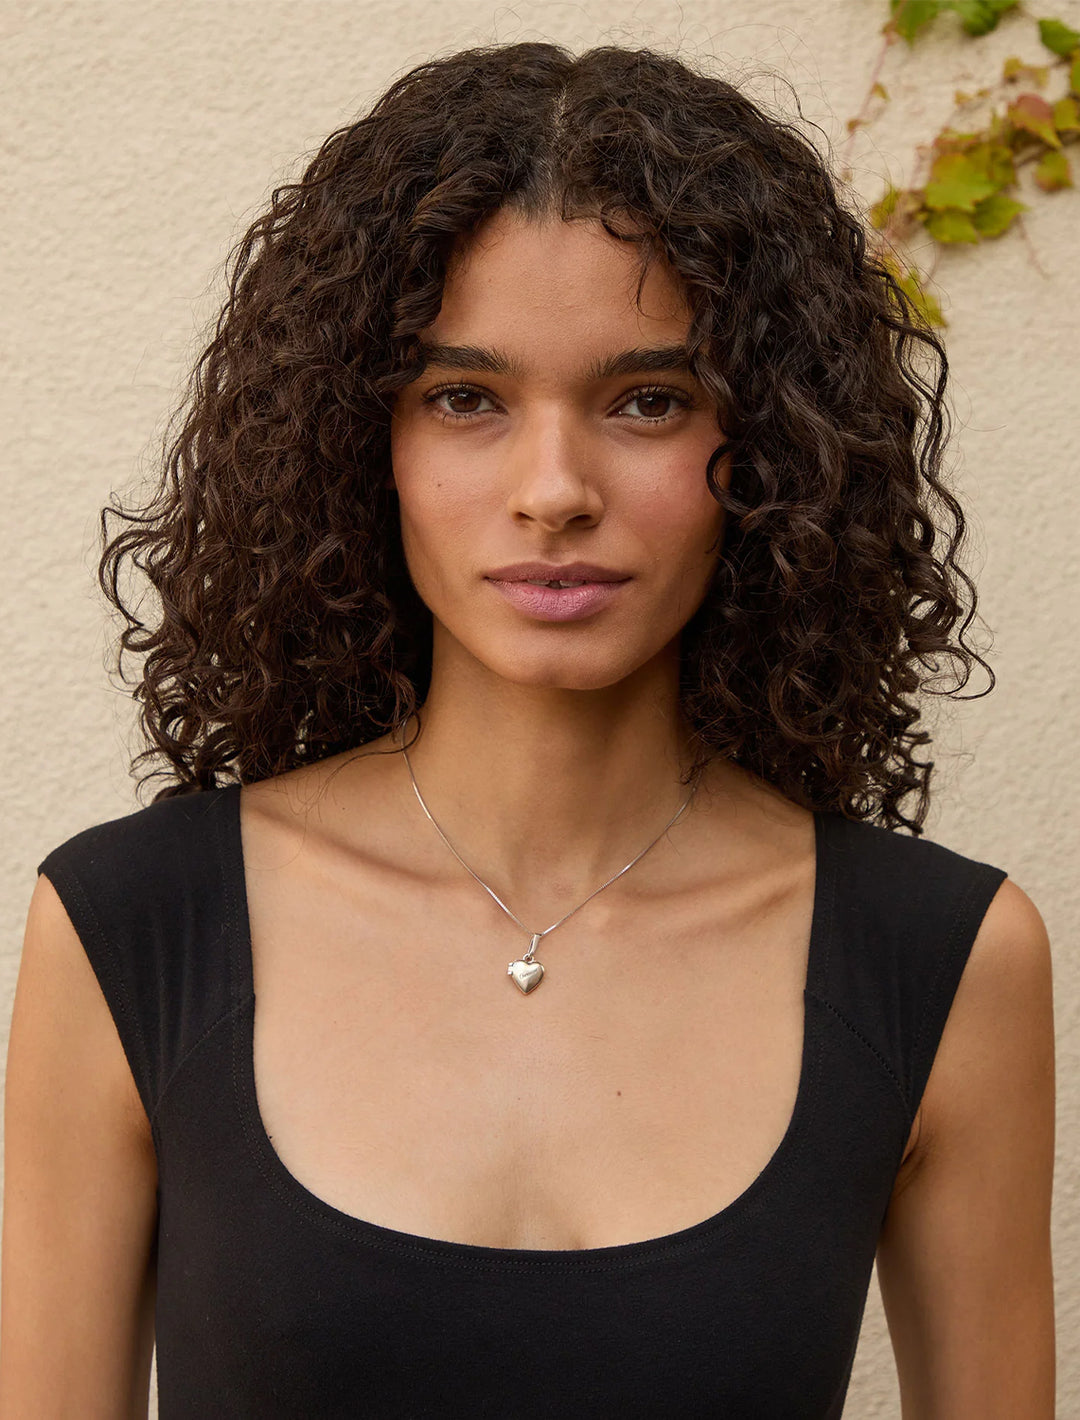 Model wearing Clare V.'s petit heart locket attached to a chain.